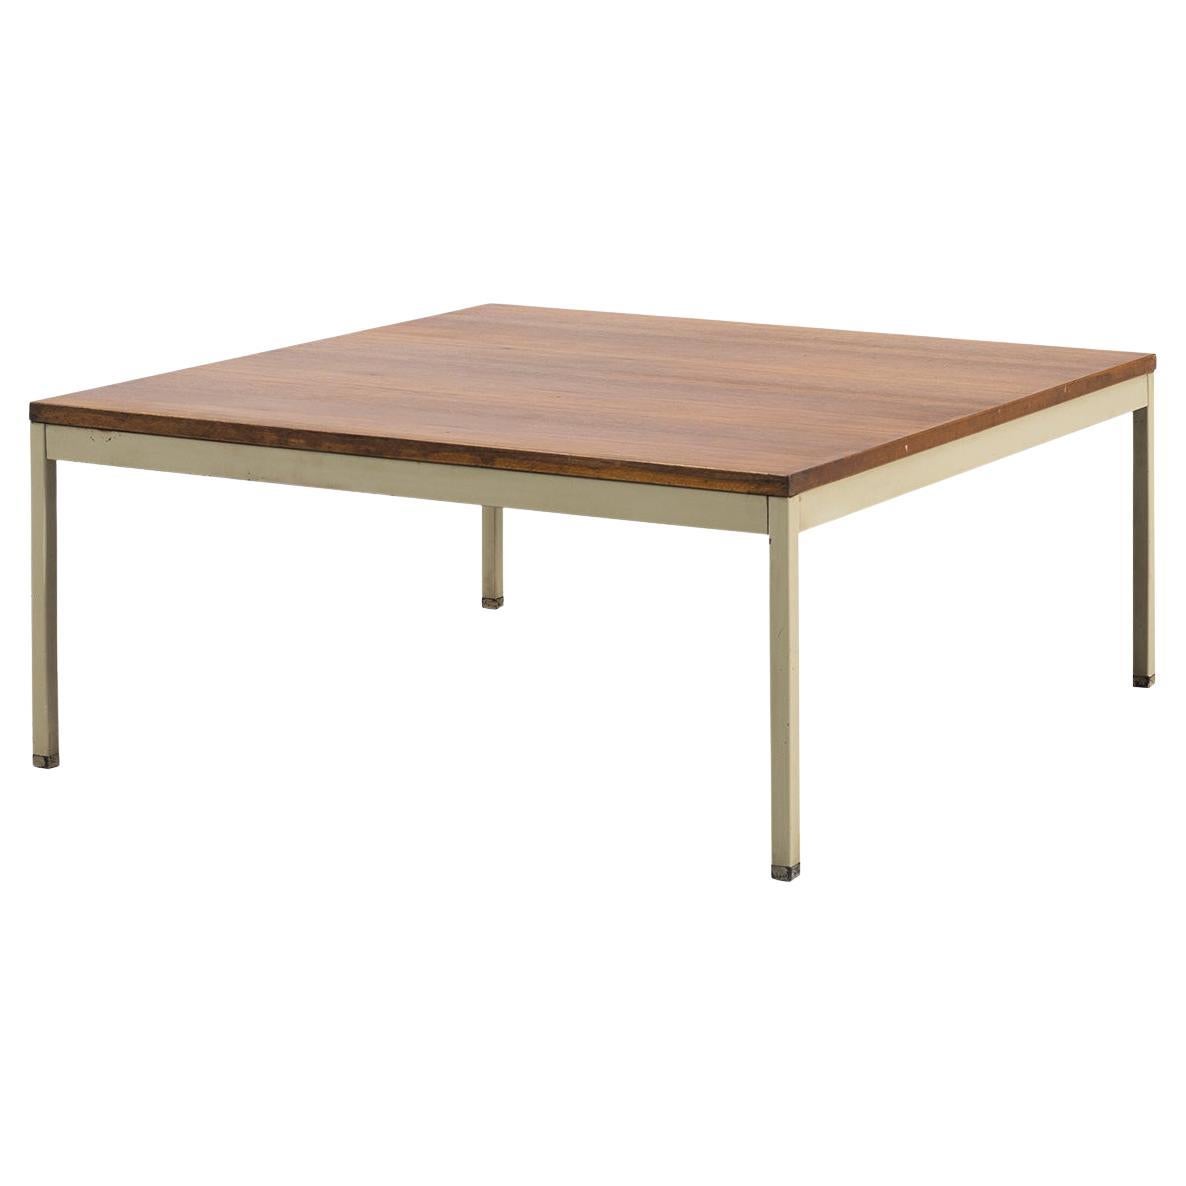 Erik Herløw Teak and Metal Center Square Coffee Table, 1960s For Sale